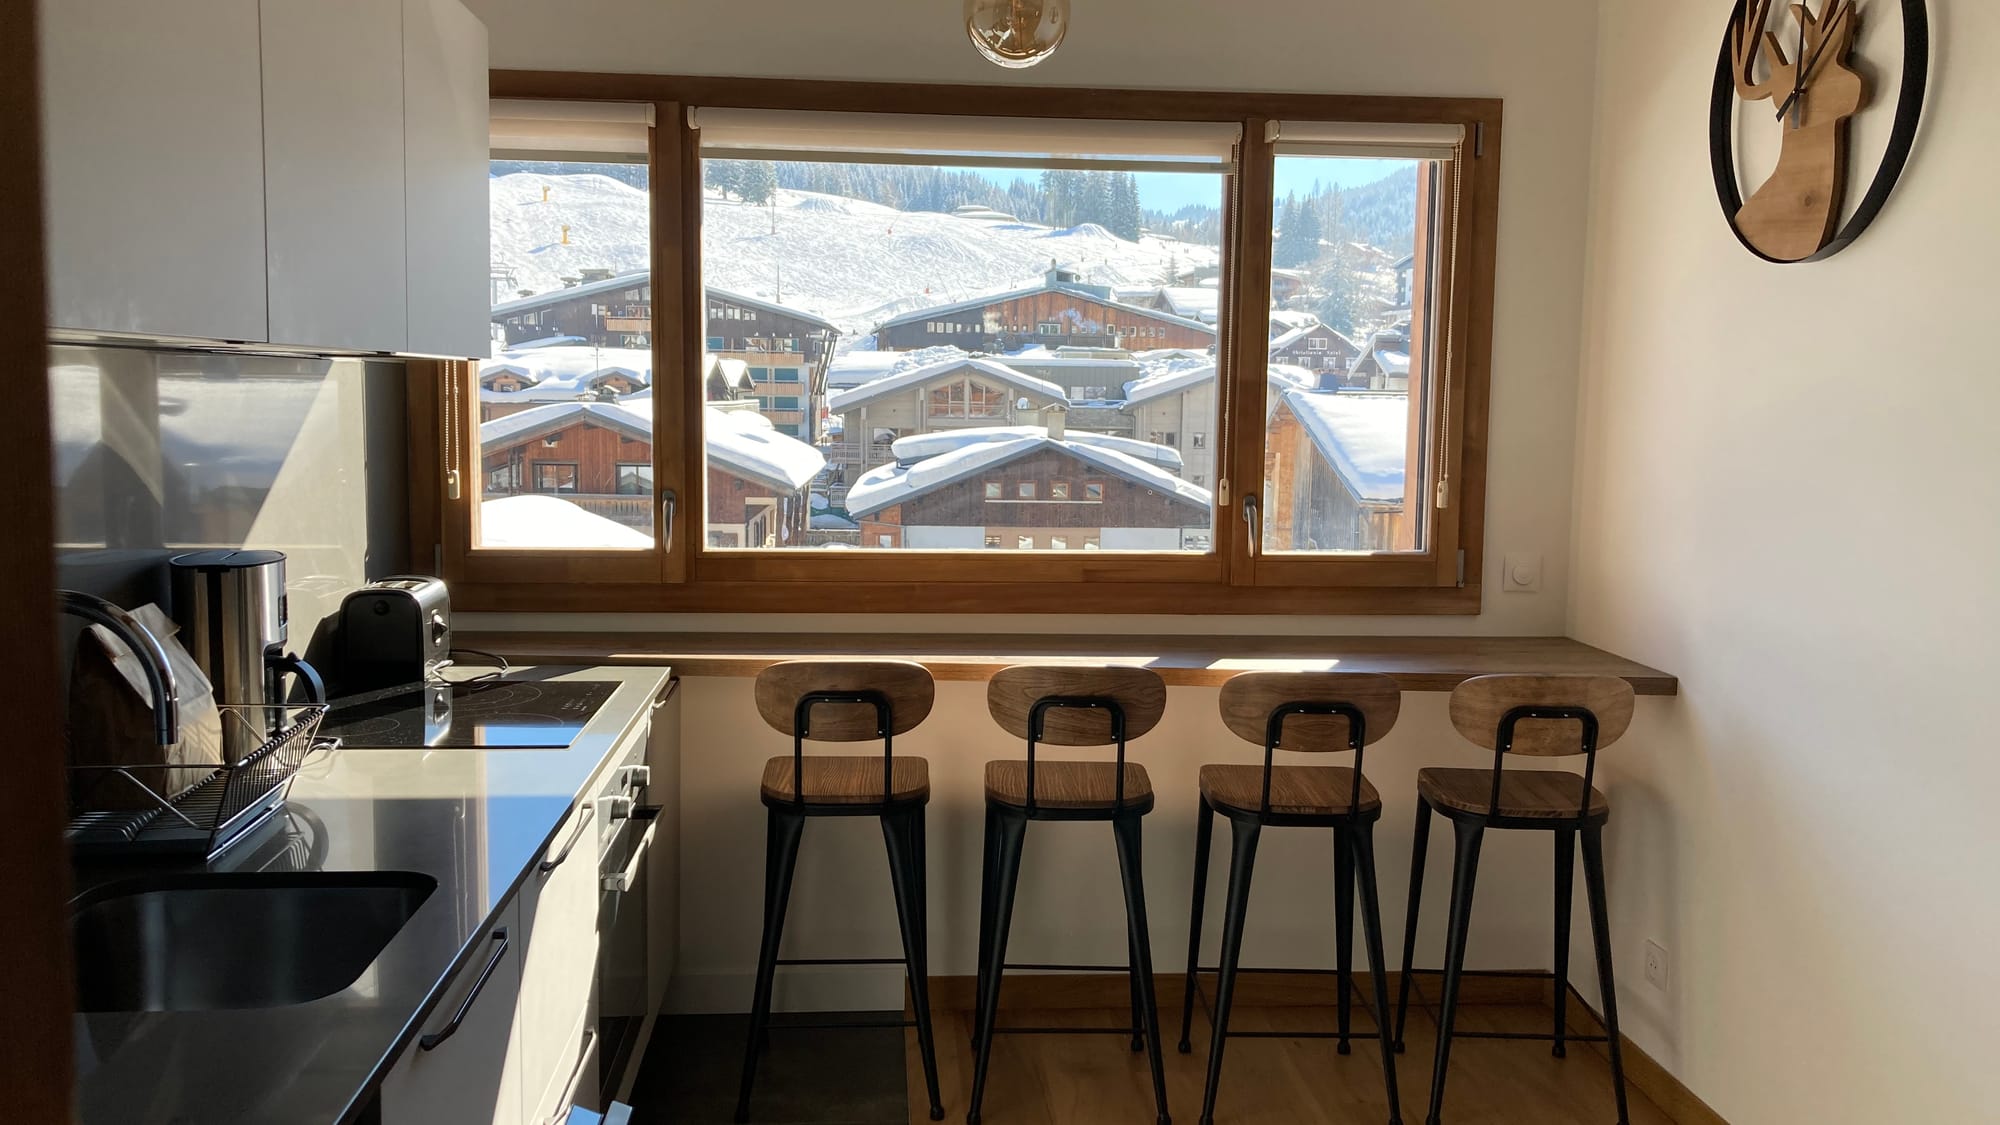 Open-kitchen with view on snowy village and ski slopes